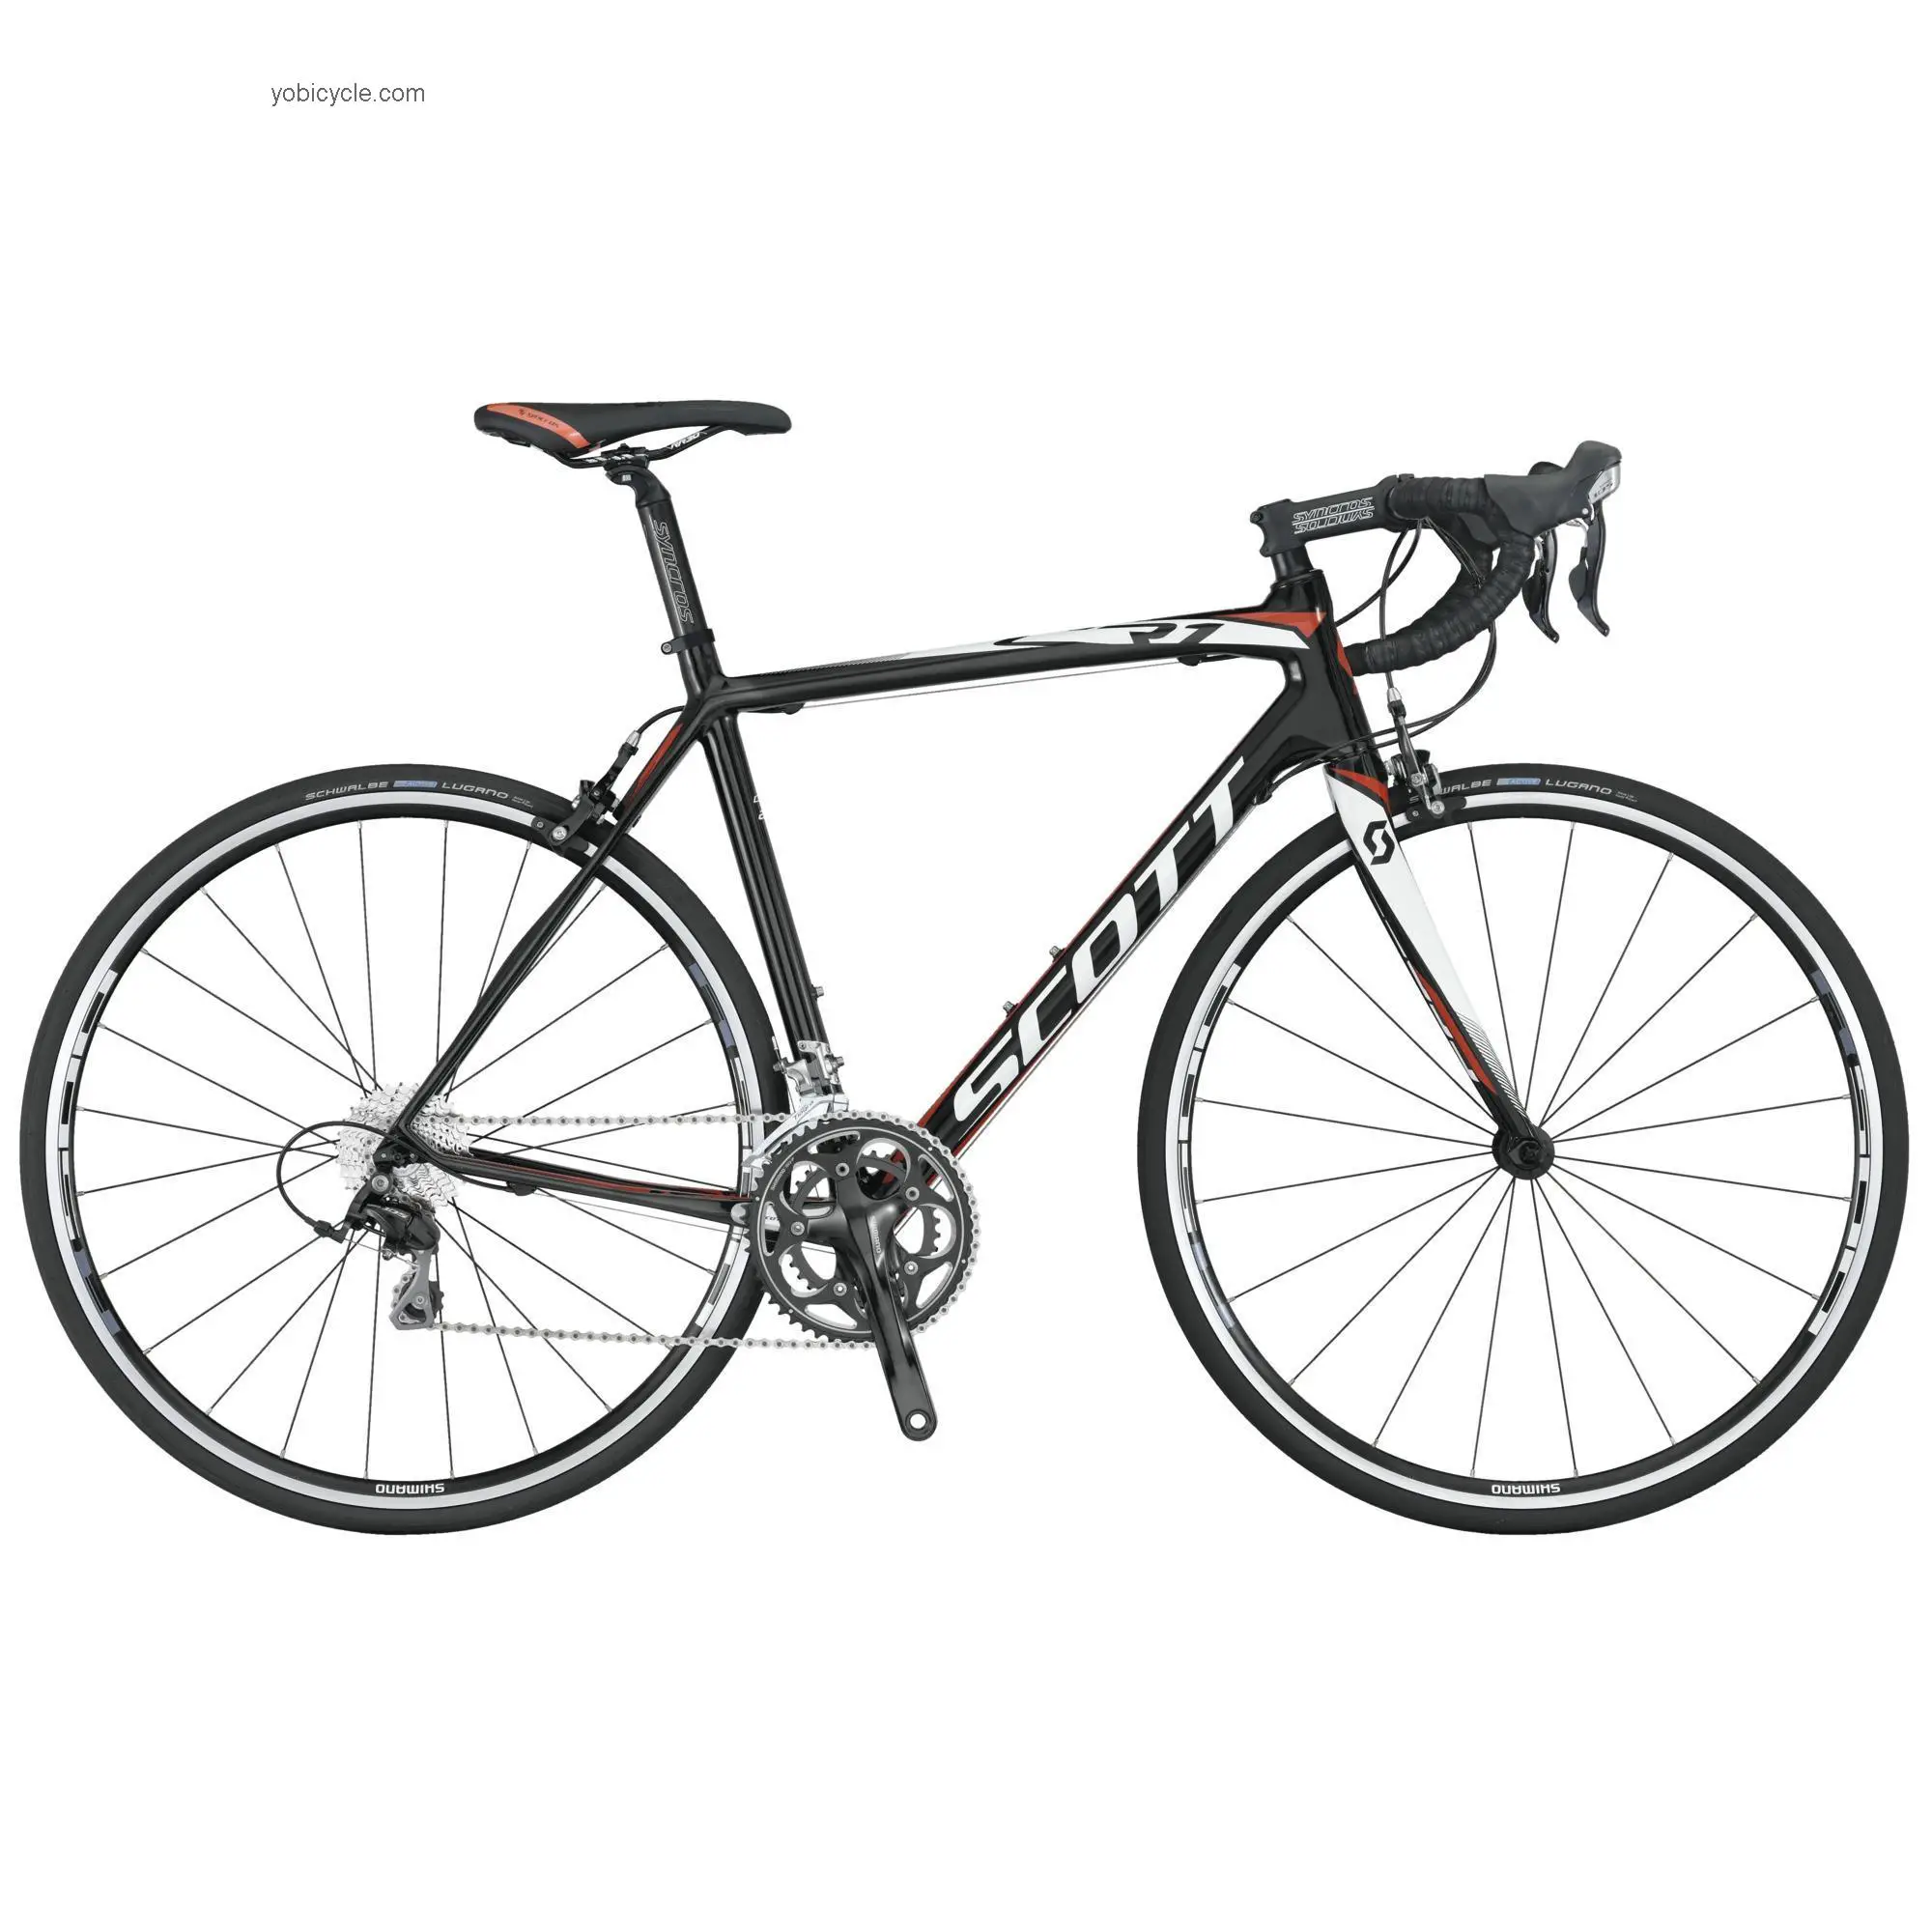 Scott  CR1 20 Technical data and specifications